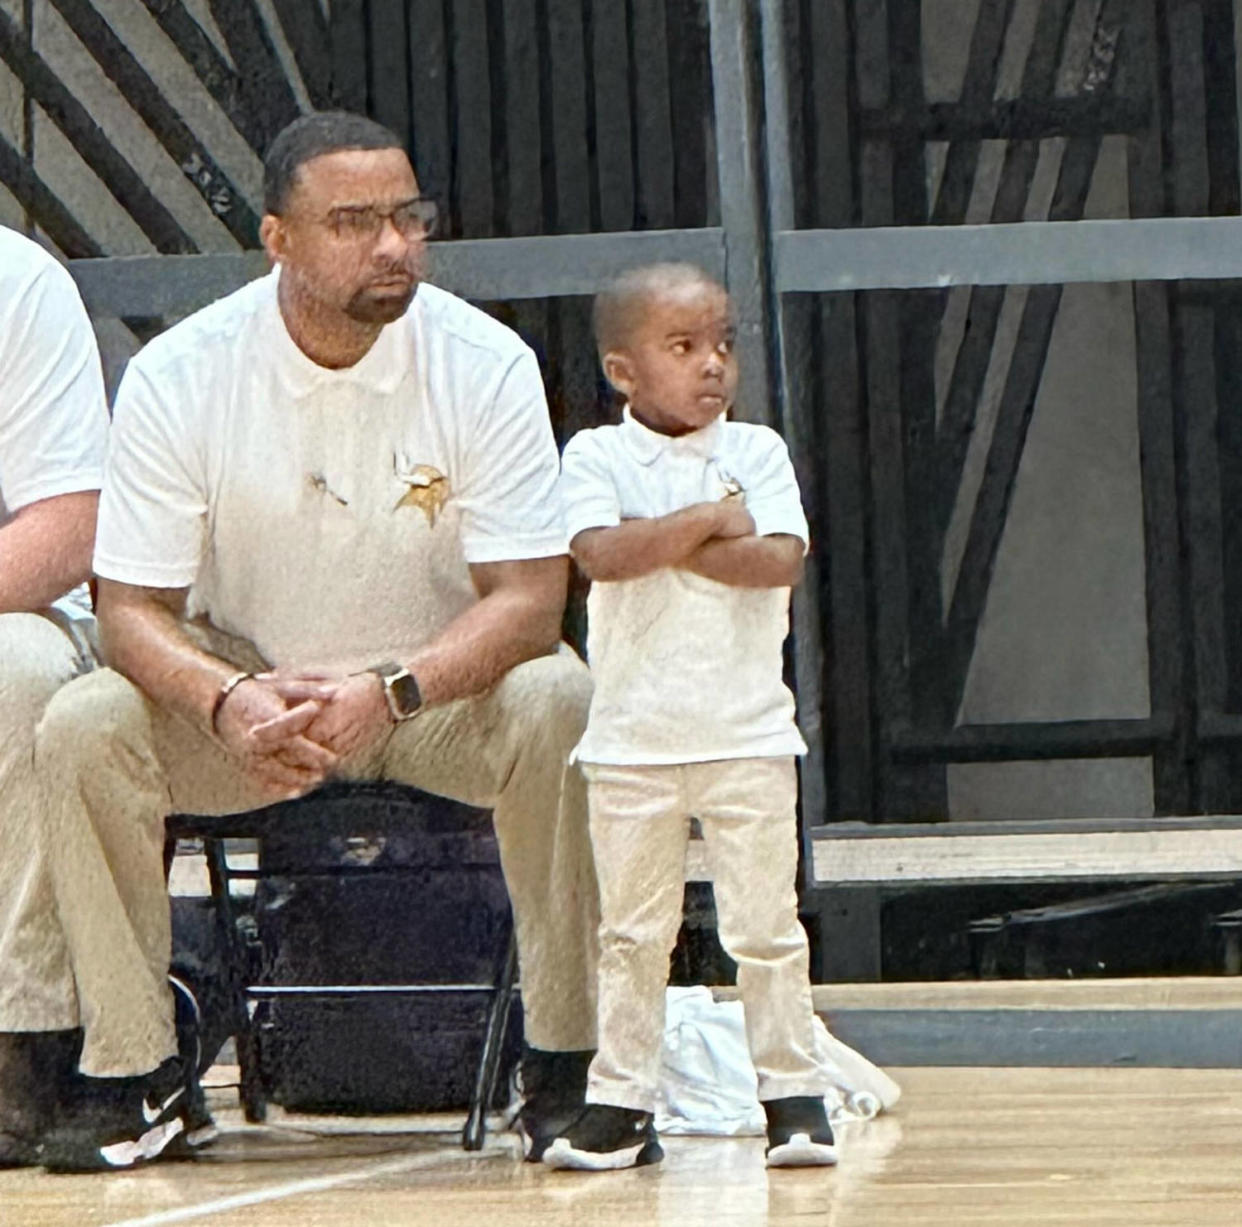 Coach Chris Bess and son at basketball game. (Courtesy Natalie Bess)